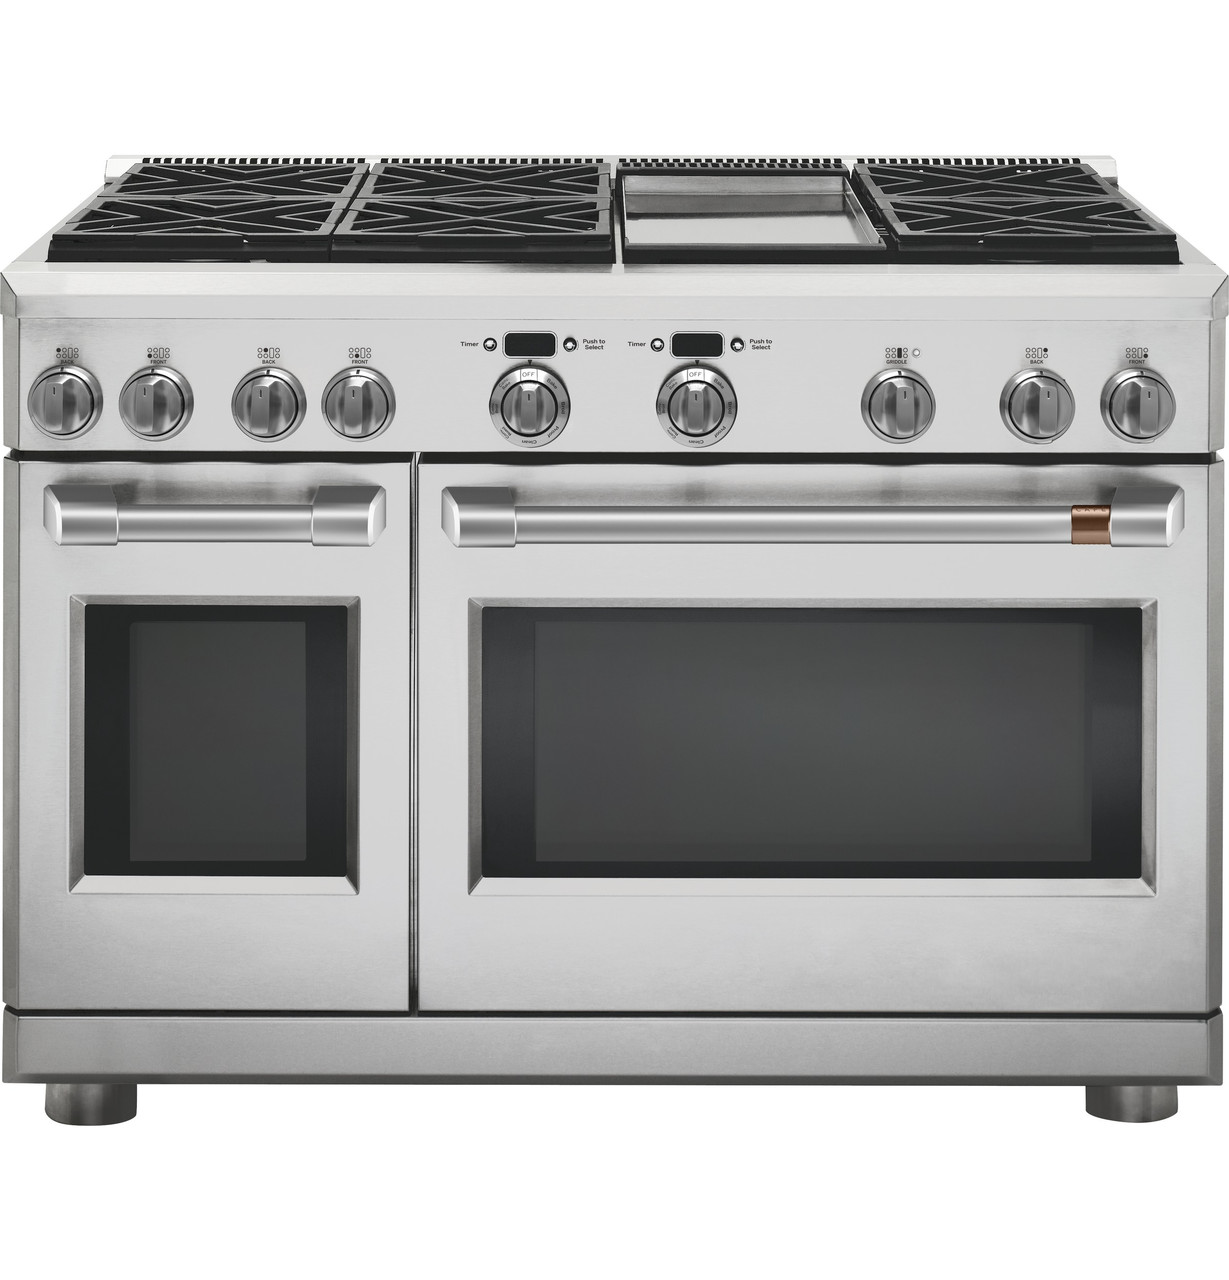 Café™ 48 Smart Dual-Fuel Commercial-Style Range with 6 Burners and Griddle  (Natural Gas) - C2Y486P2TS1 - Cafe Appliances